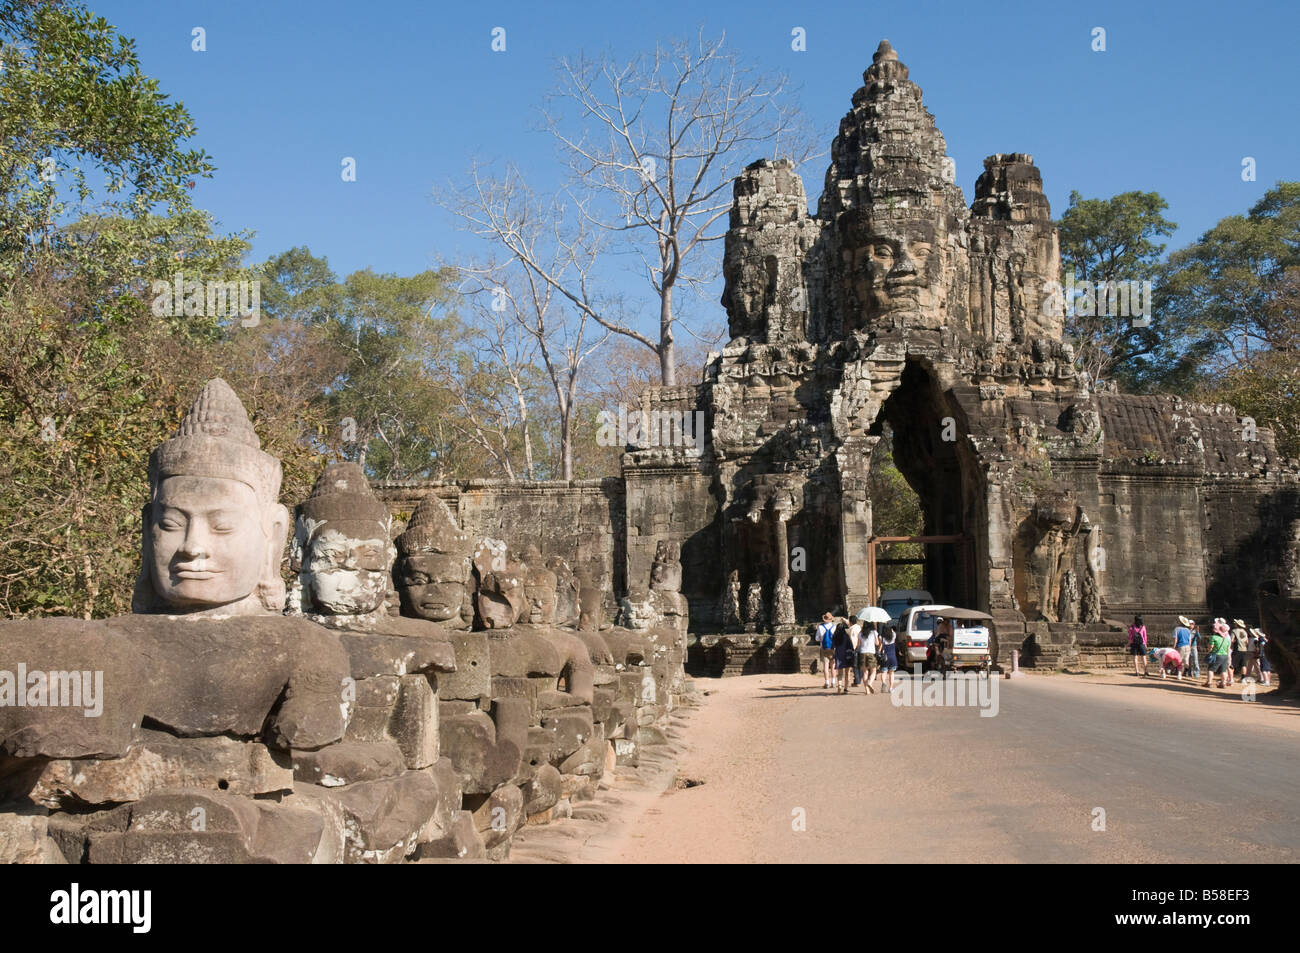 South Gate entrance to Angkor Thom, Angkor, UNESCO World Heritage Site, Siem Reap, Cambodia, Indochina, Southeast Asia Stock Photo